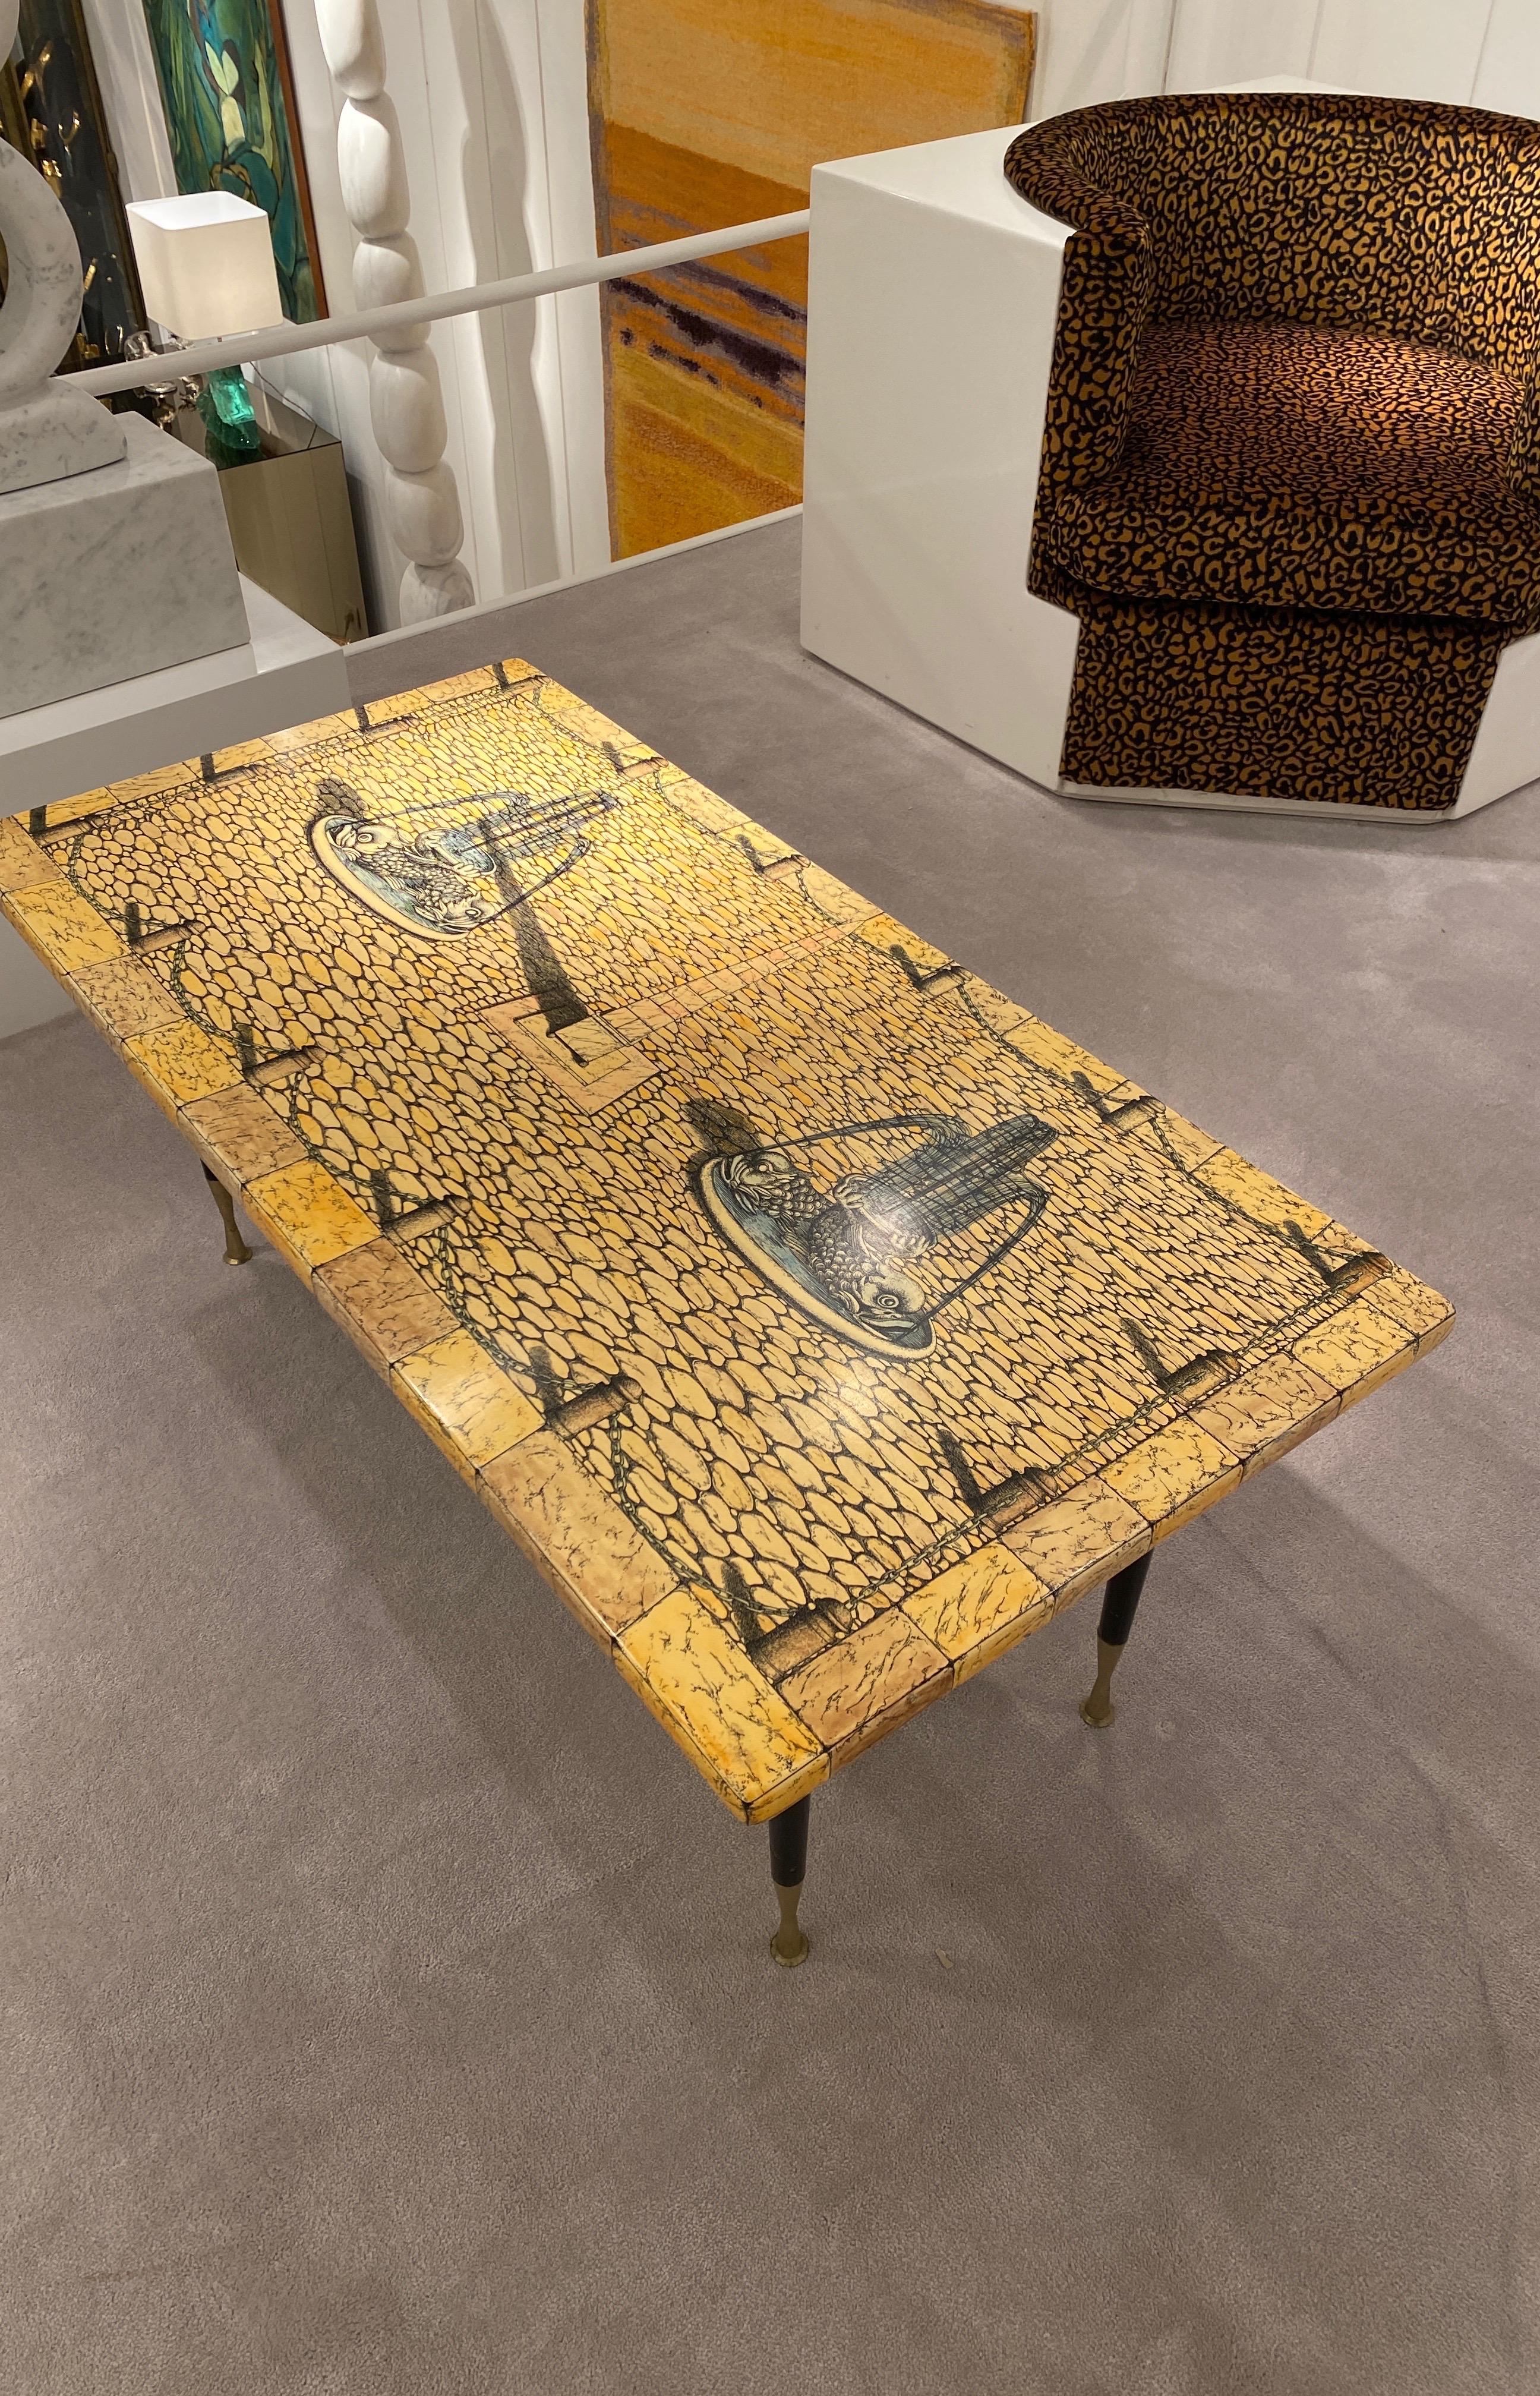 PIero Fornasetti Coffe Table In Good Condition For Sale In Saint-Ouen, FR